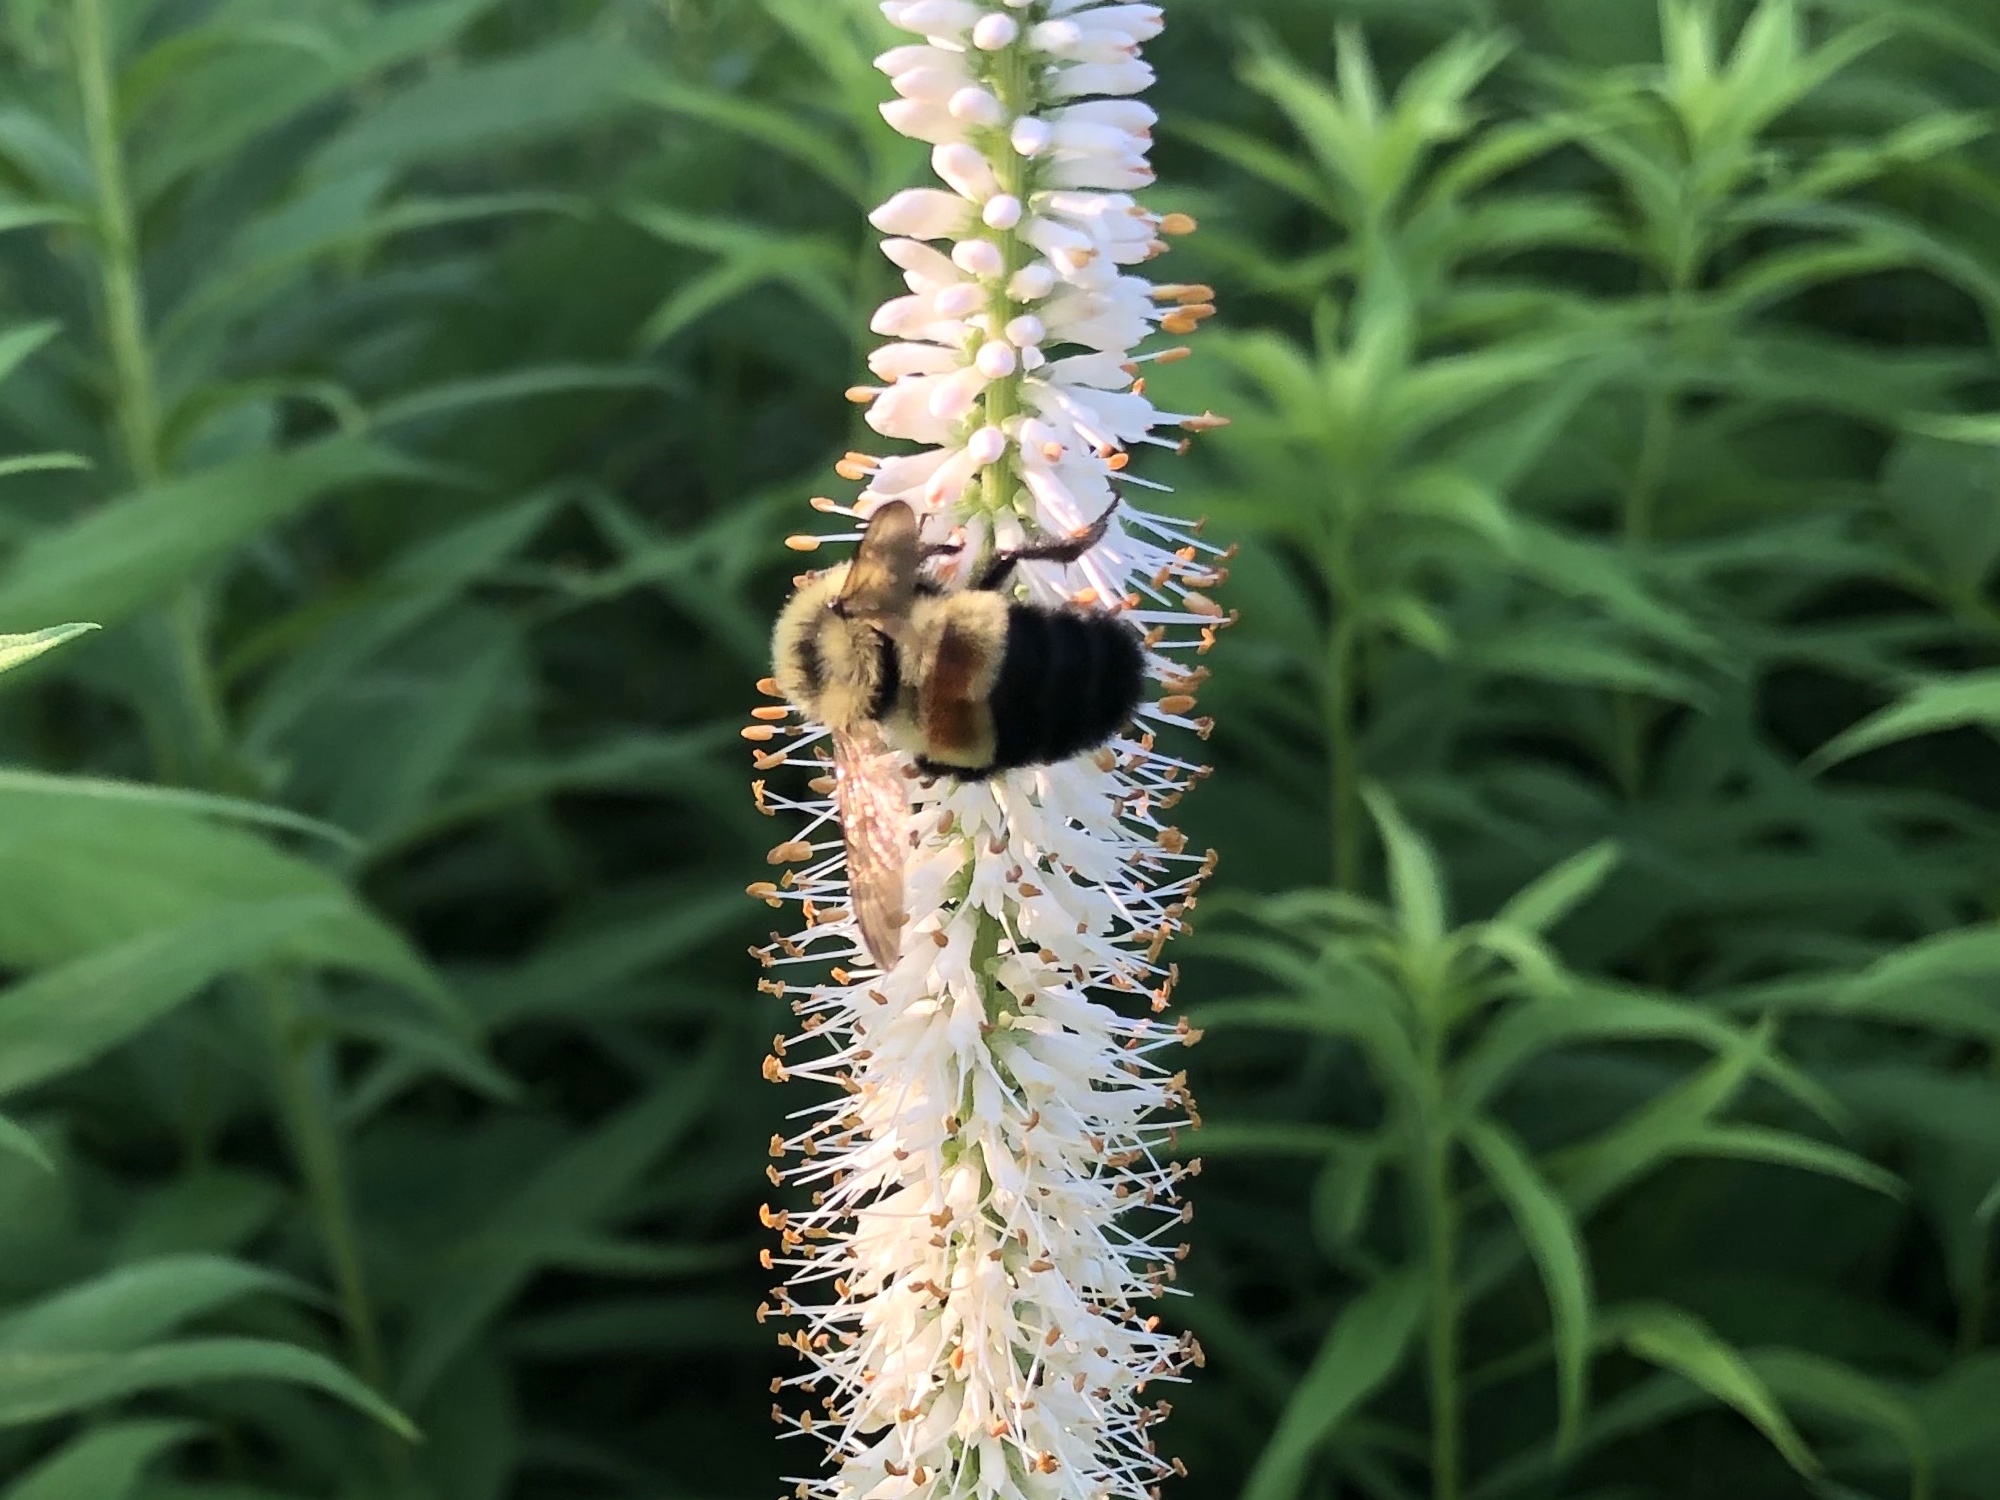 Rusty Patch Bumblebee on Culver's Root In Oak Savnanna in Madison, Wisconsin on July 6, 2021.